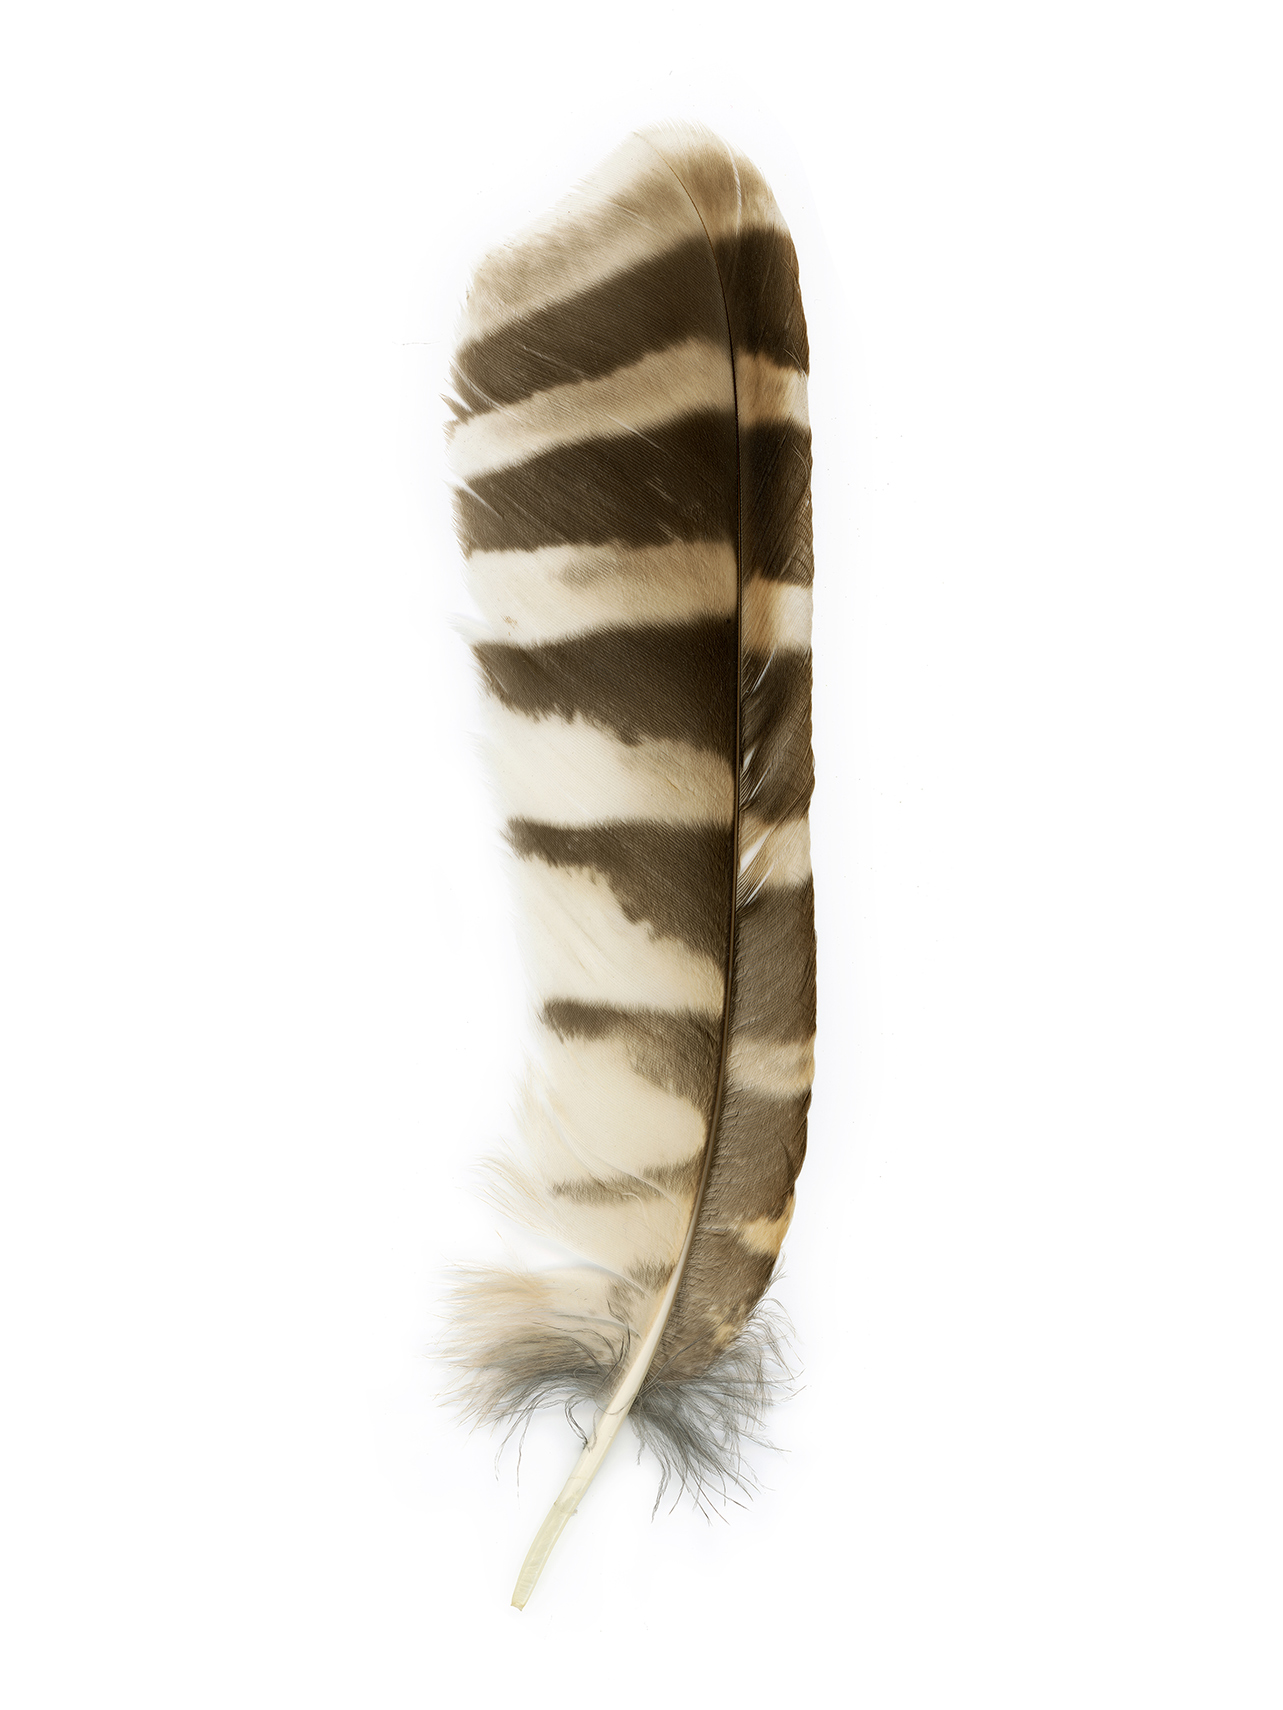 feather3